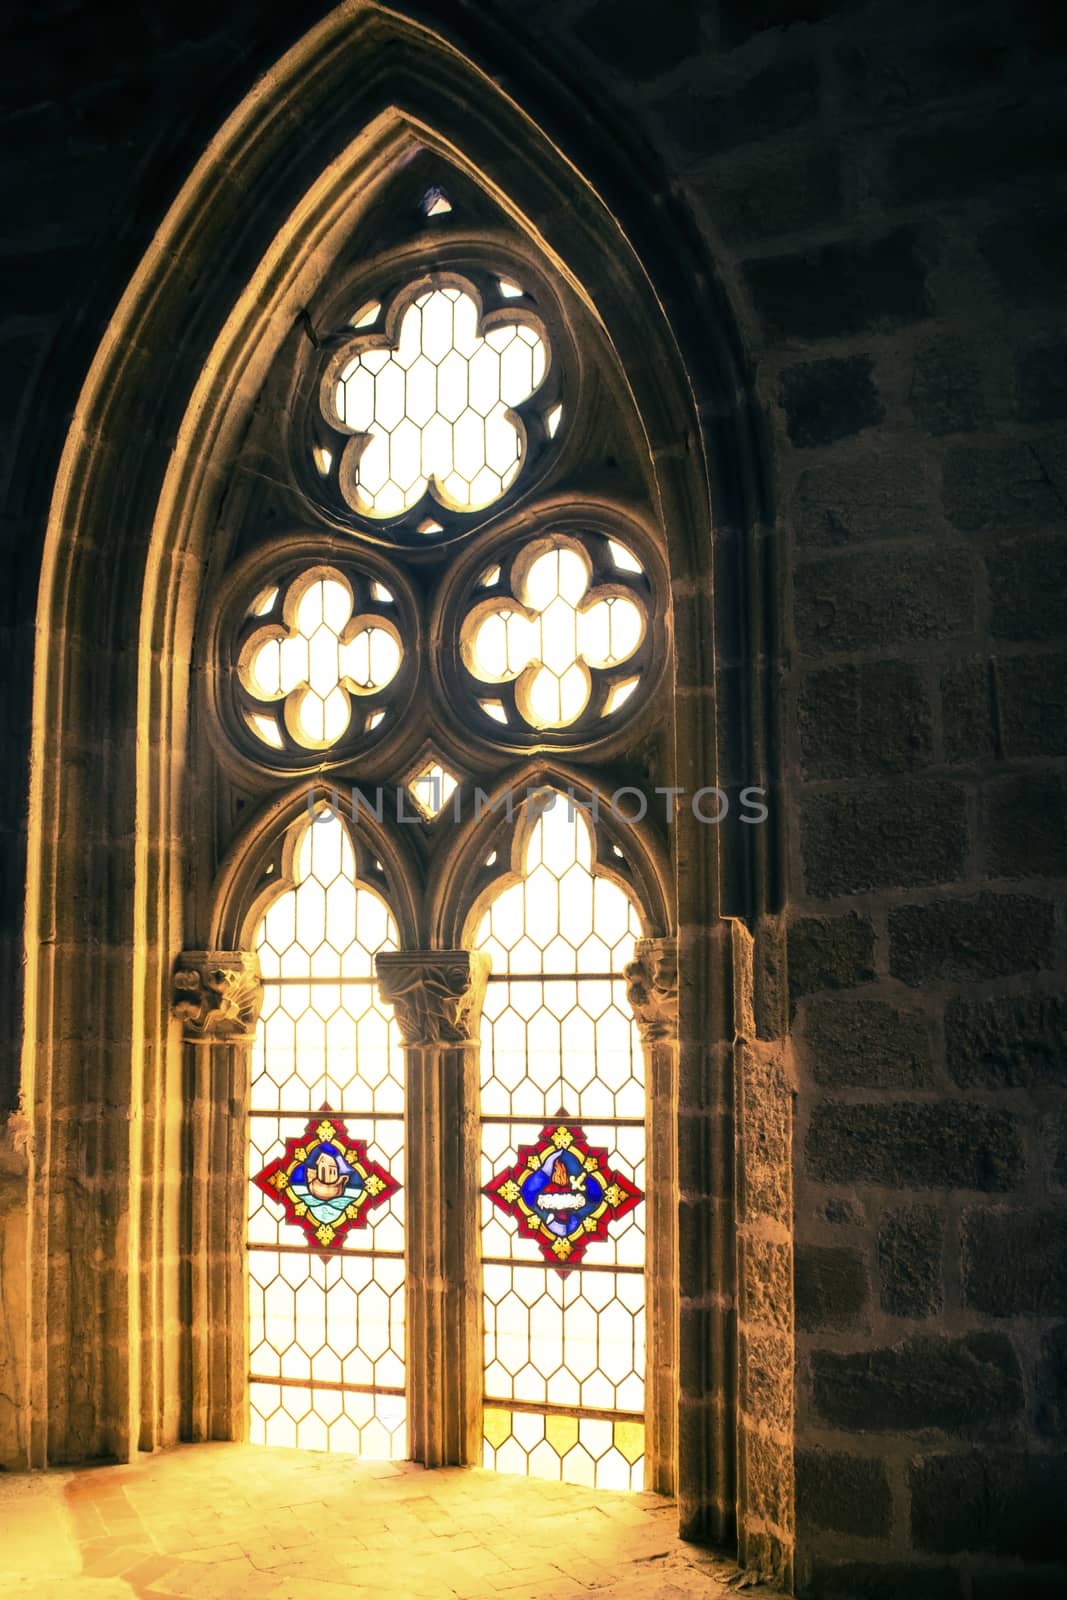 Sunlight shining through stained glass of gothic window of a church. by kb79